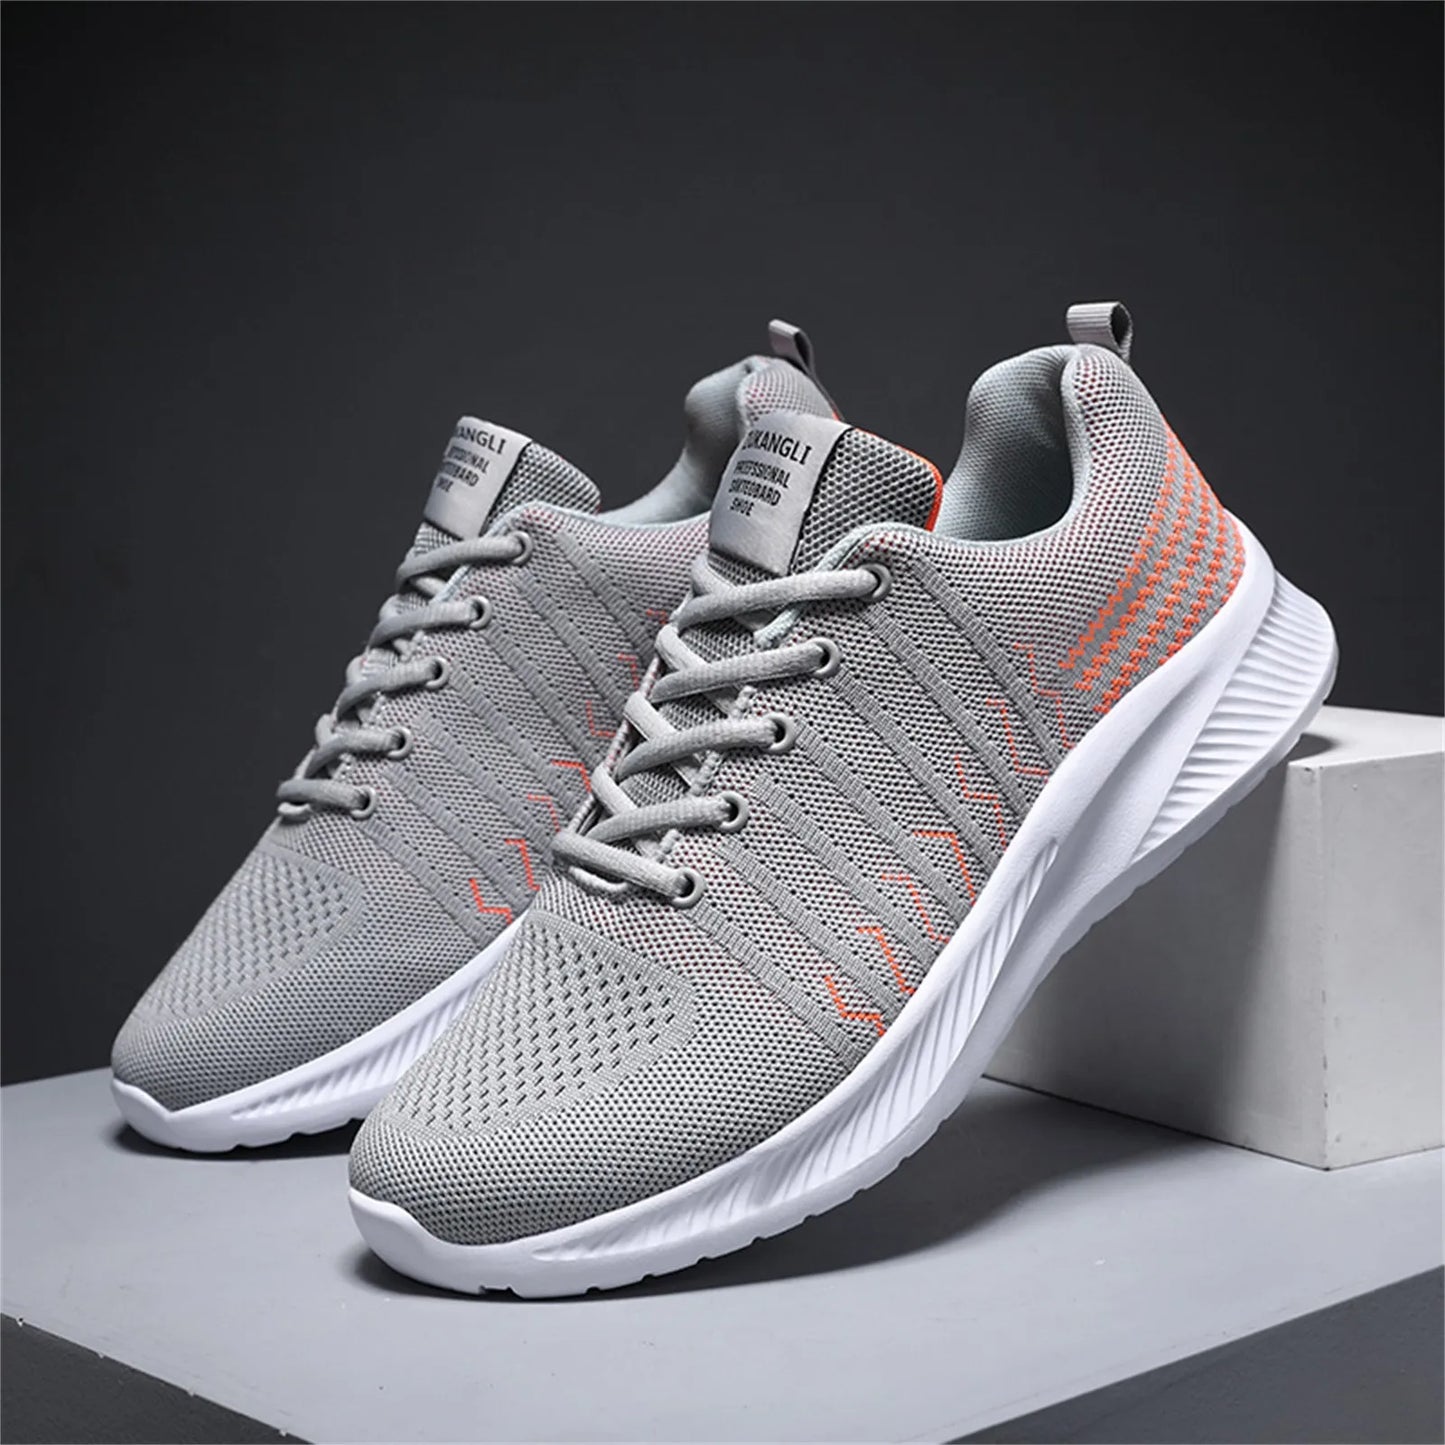 Men Soft Sole Colorblock Mesh Lace Up Casual Shoes/Comfortable Breathable Sneakers Walking